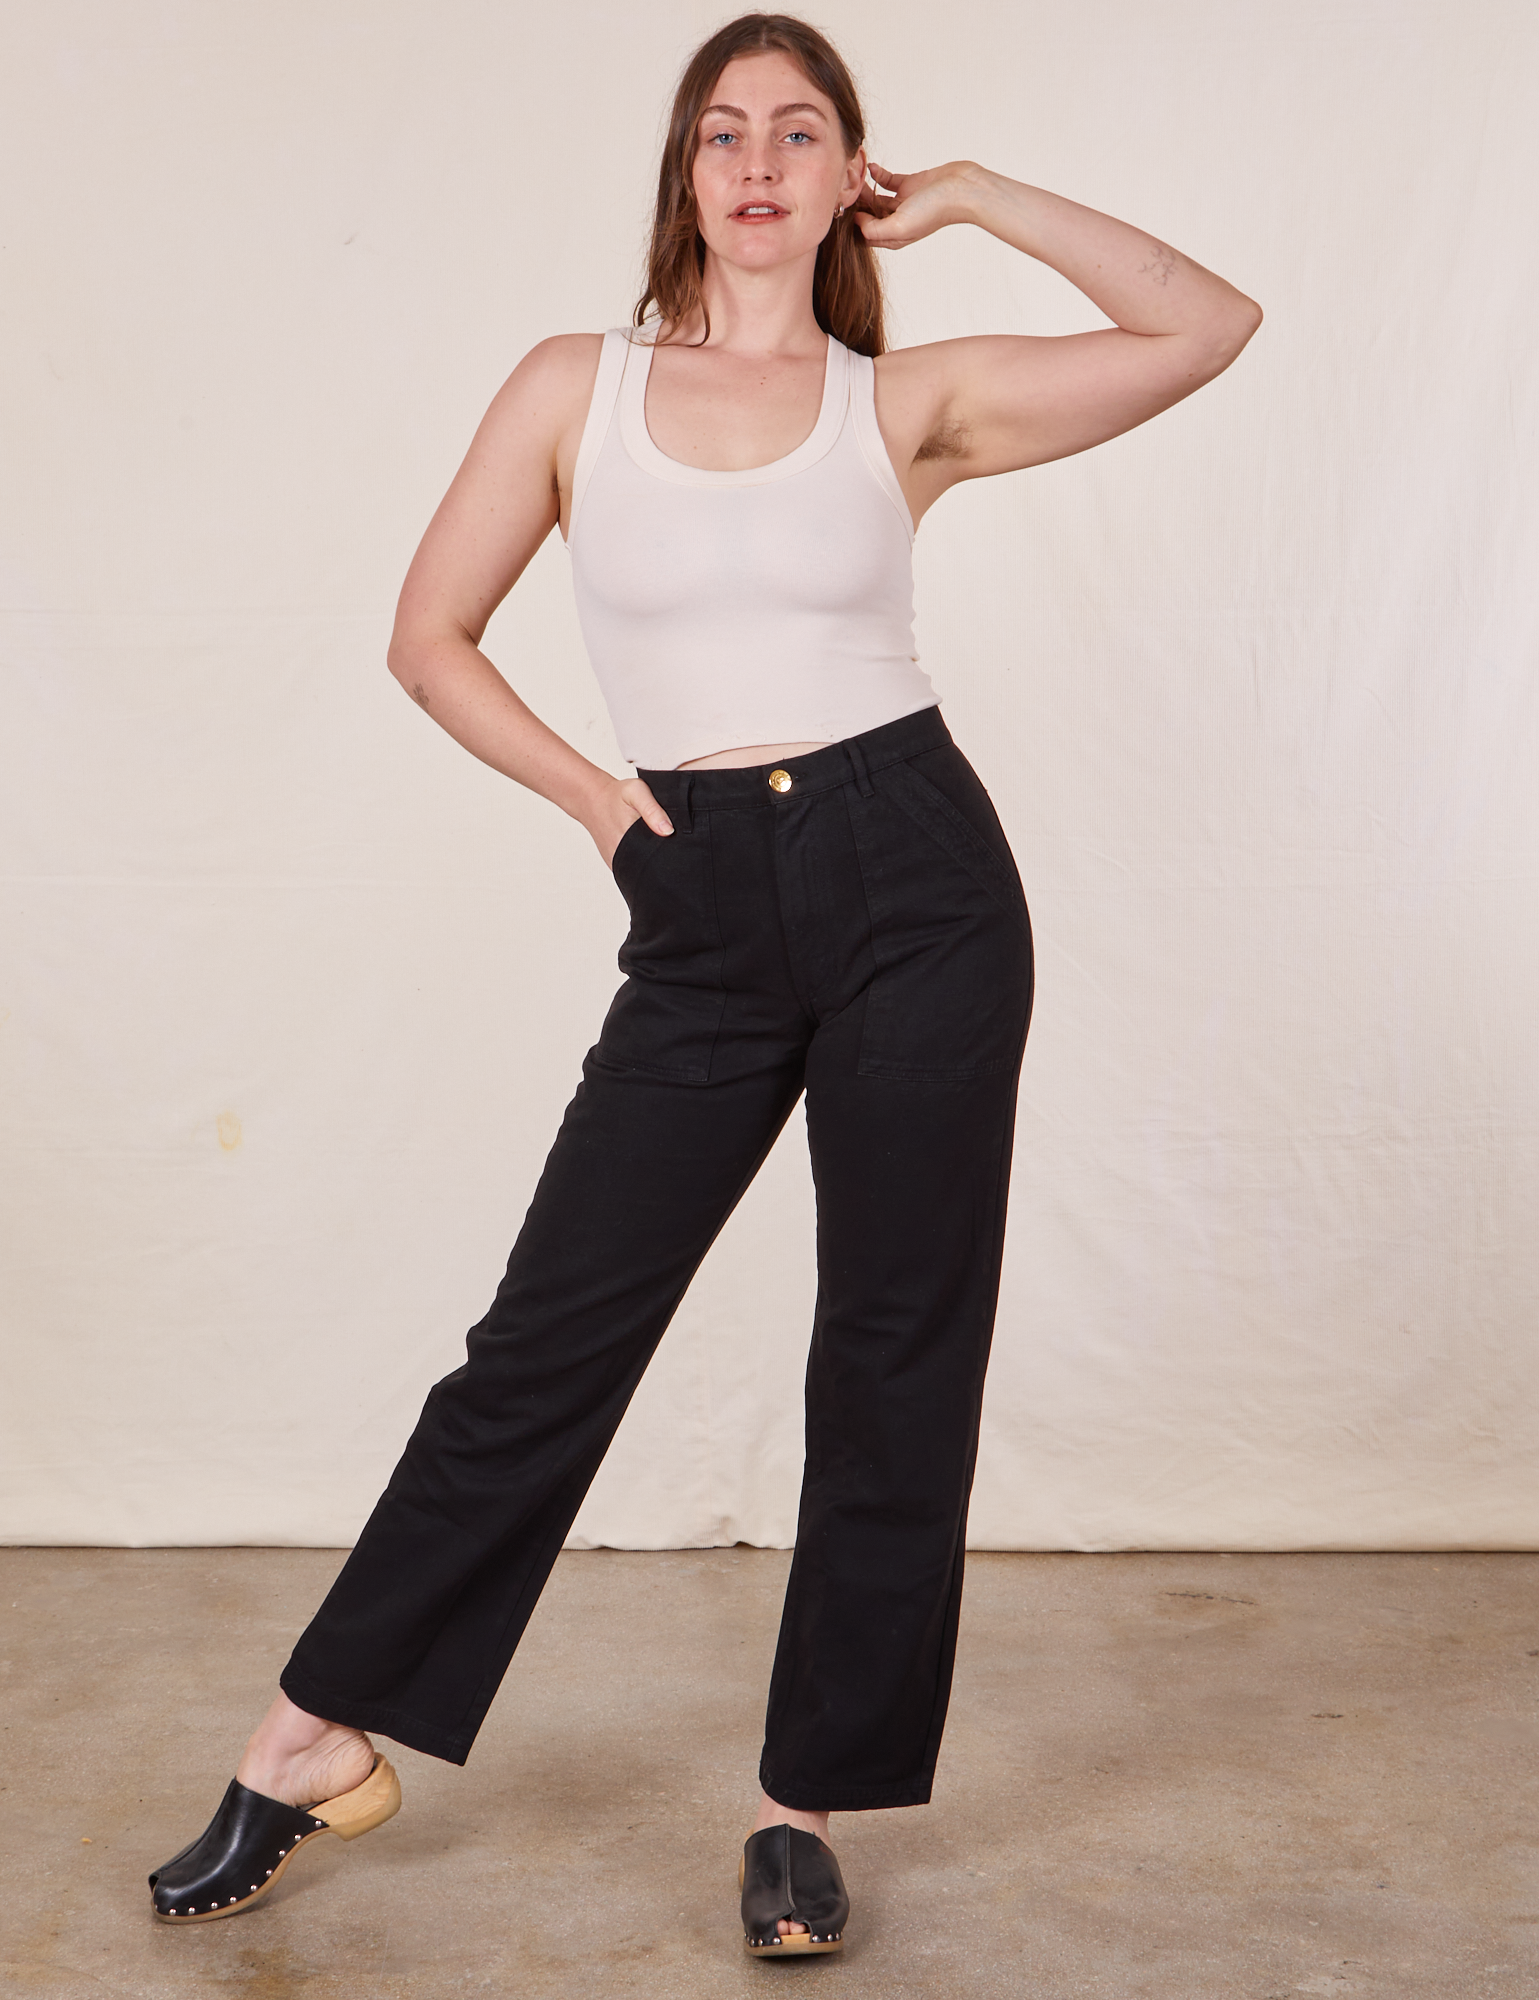 Allison is 5&#39;10&quot; and wearing Long S Work Pants in Basic Black paired with vintage off-white Tank Top